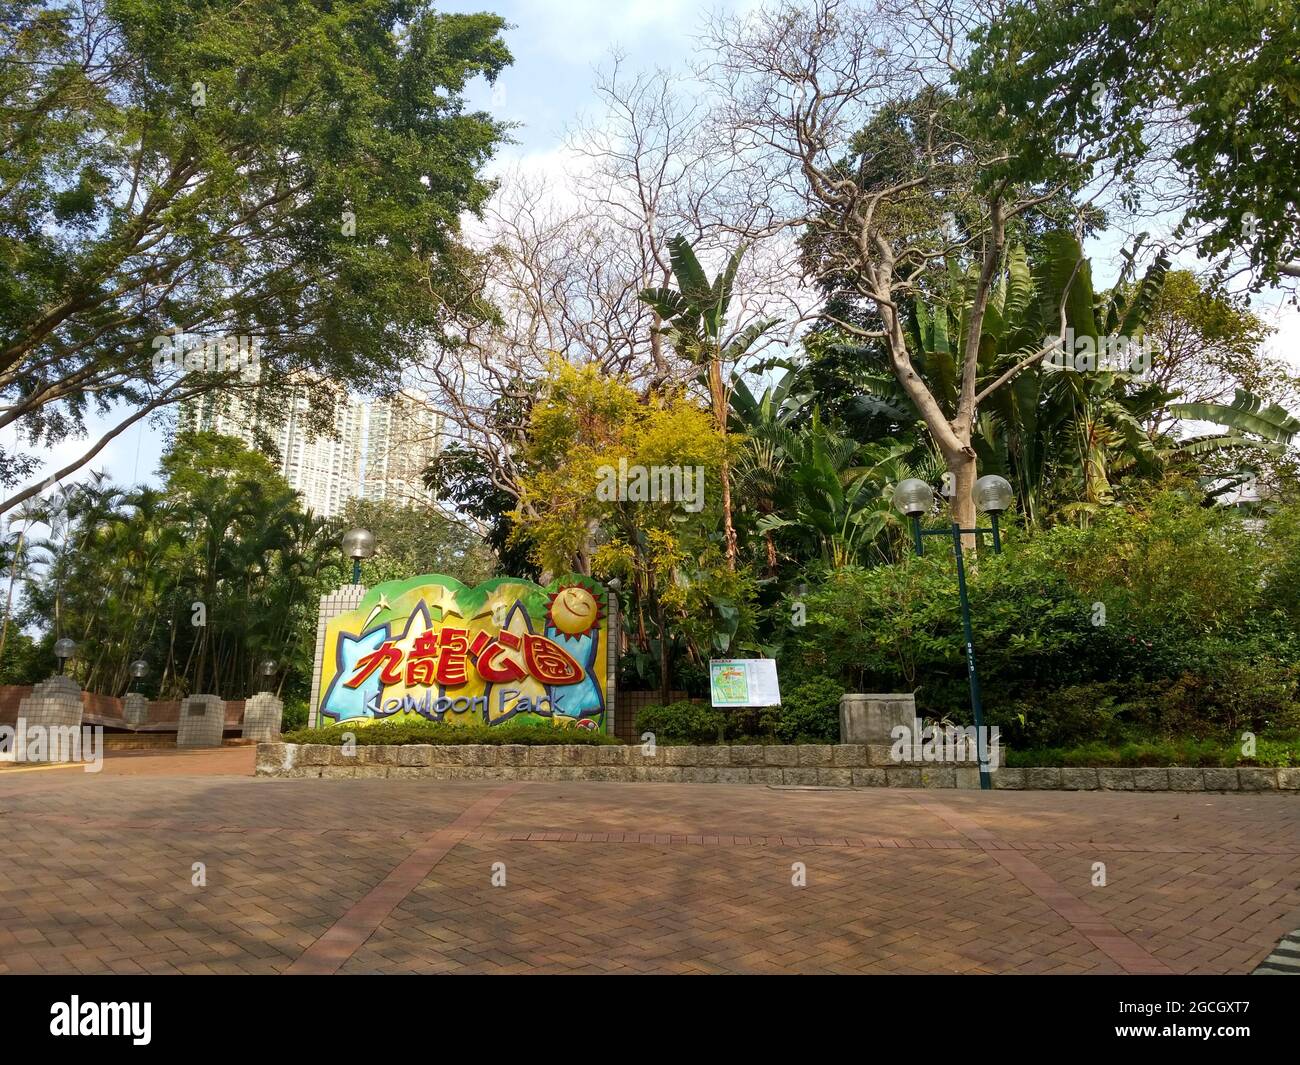 The entrance to Kowloon Park in Hong Kong with brick paths leading to a large colorful sign in Chinese with a happy sun and stars plus a park map Stock Photo